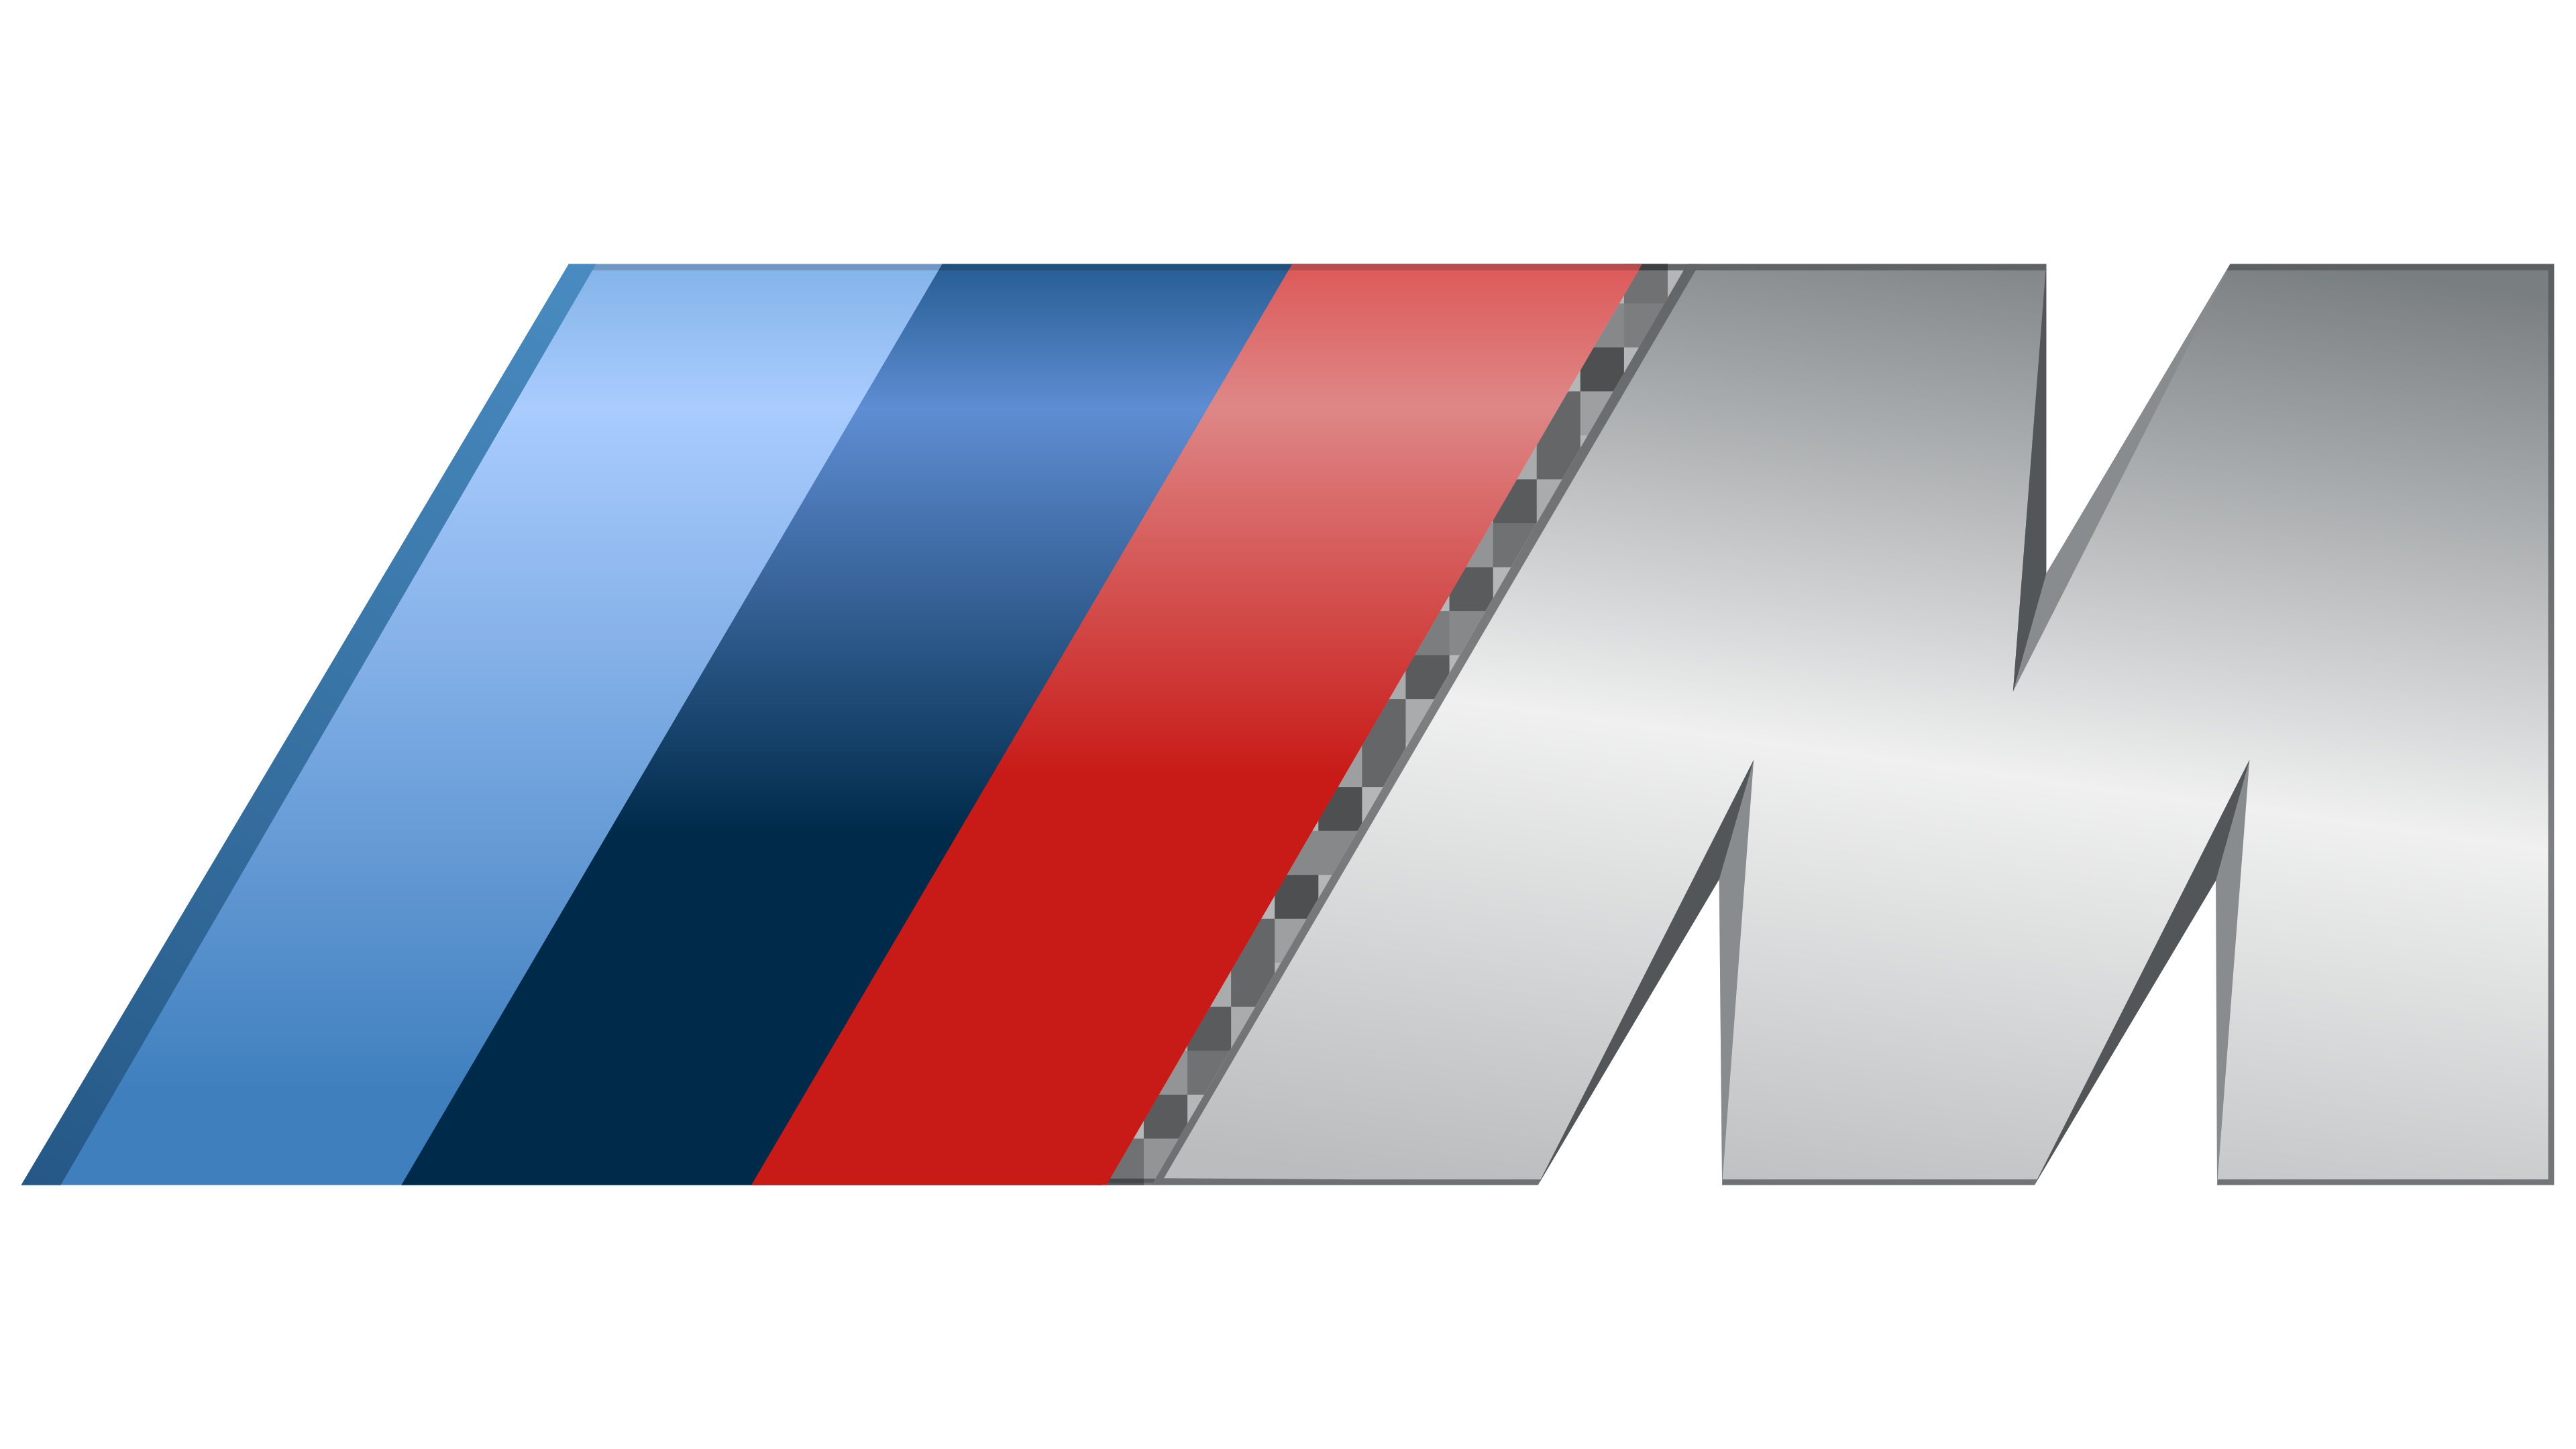 A Deeper Dive into the History of the BMW M Logo Colors